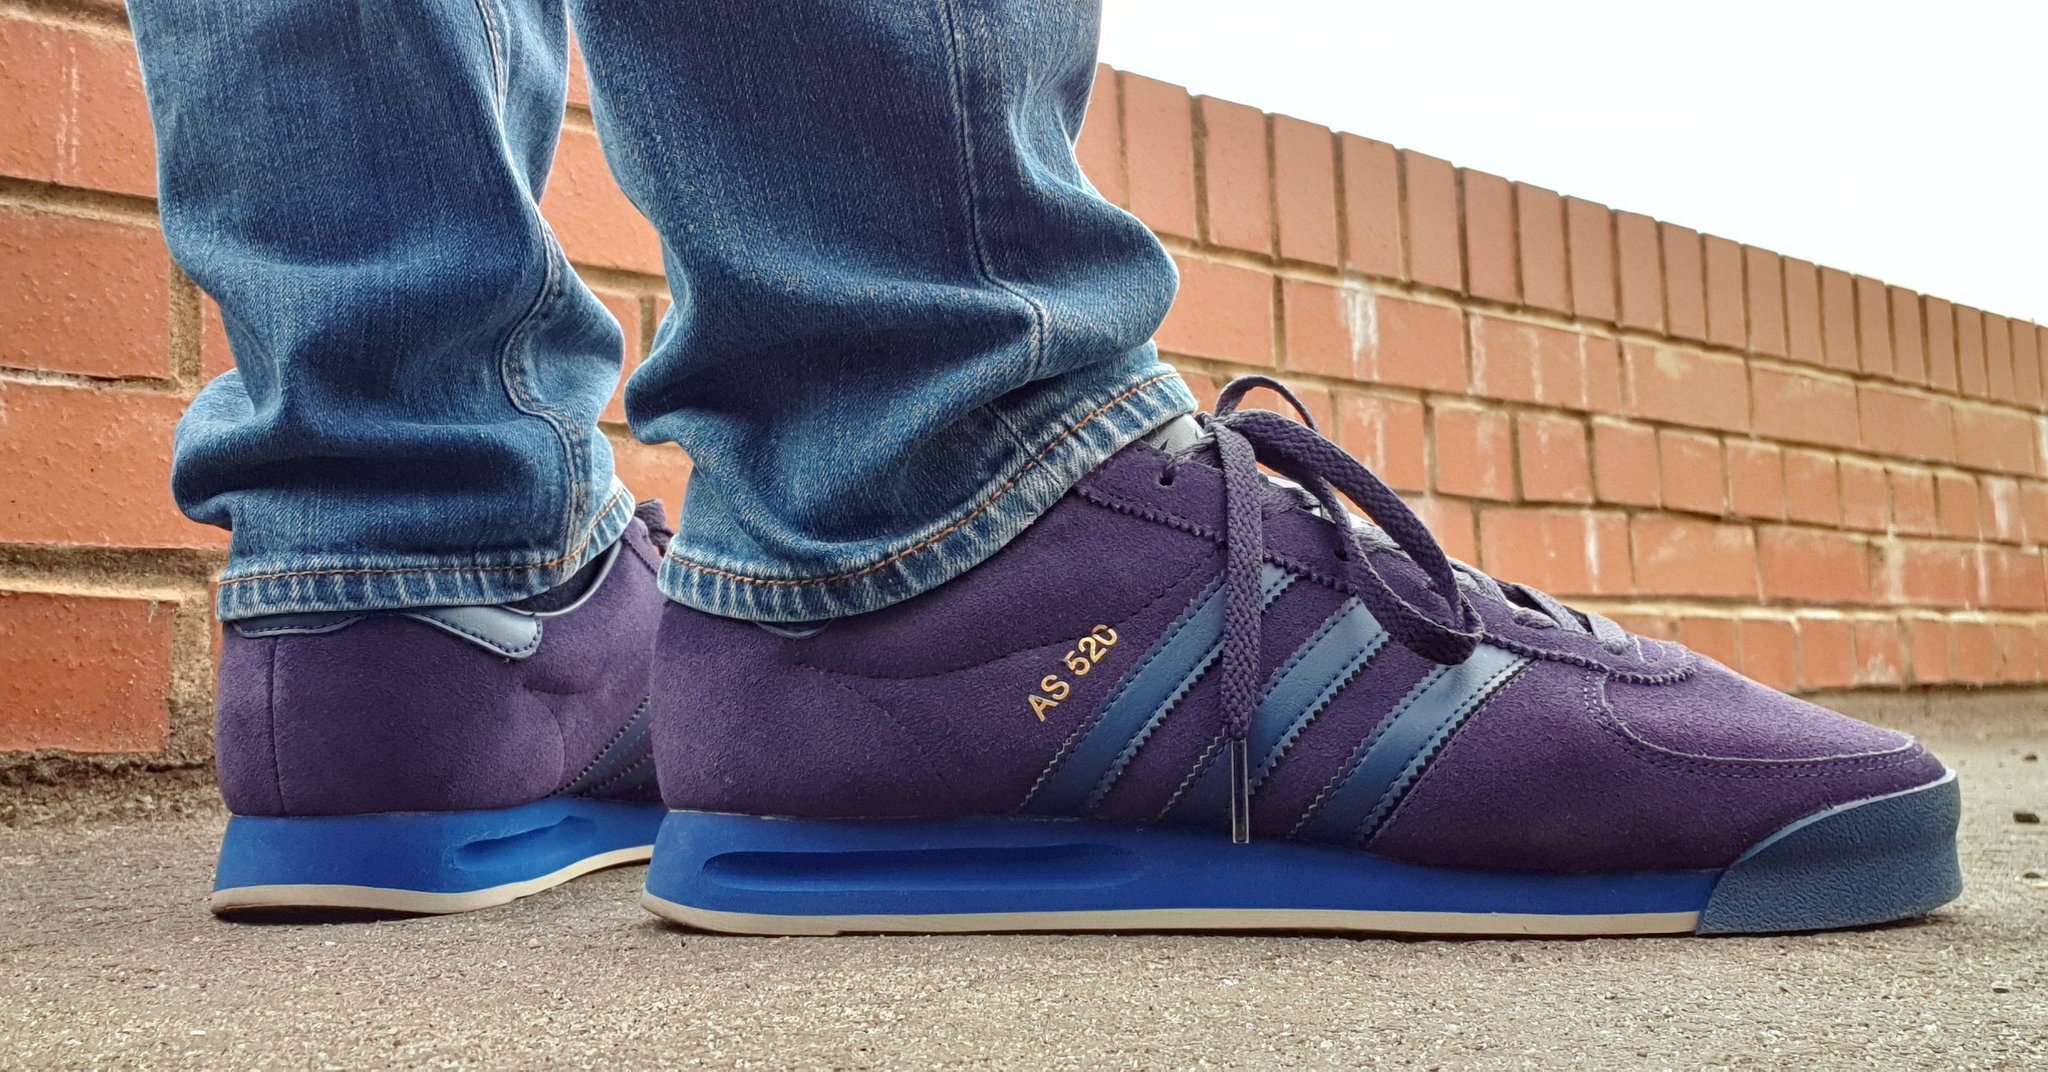 Dominic Powell /// on Twitter: "Adidas Spezial AS 520 SPZL (SUPCOL/SUPCOL/SUPCOL) SPRING 2019 #Adidasspezial #spzl #adidascollector https://t.co/nFAss2JCHs" /